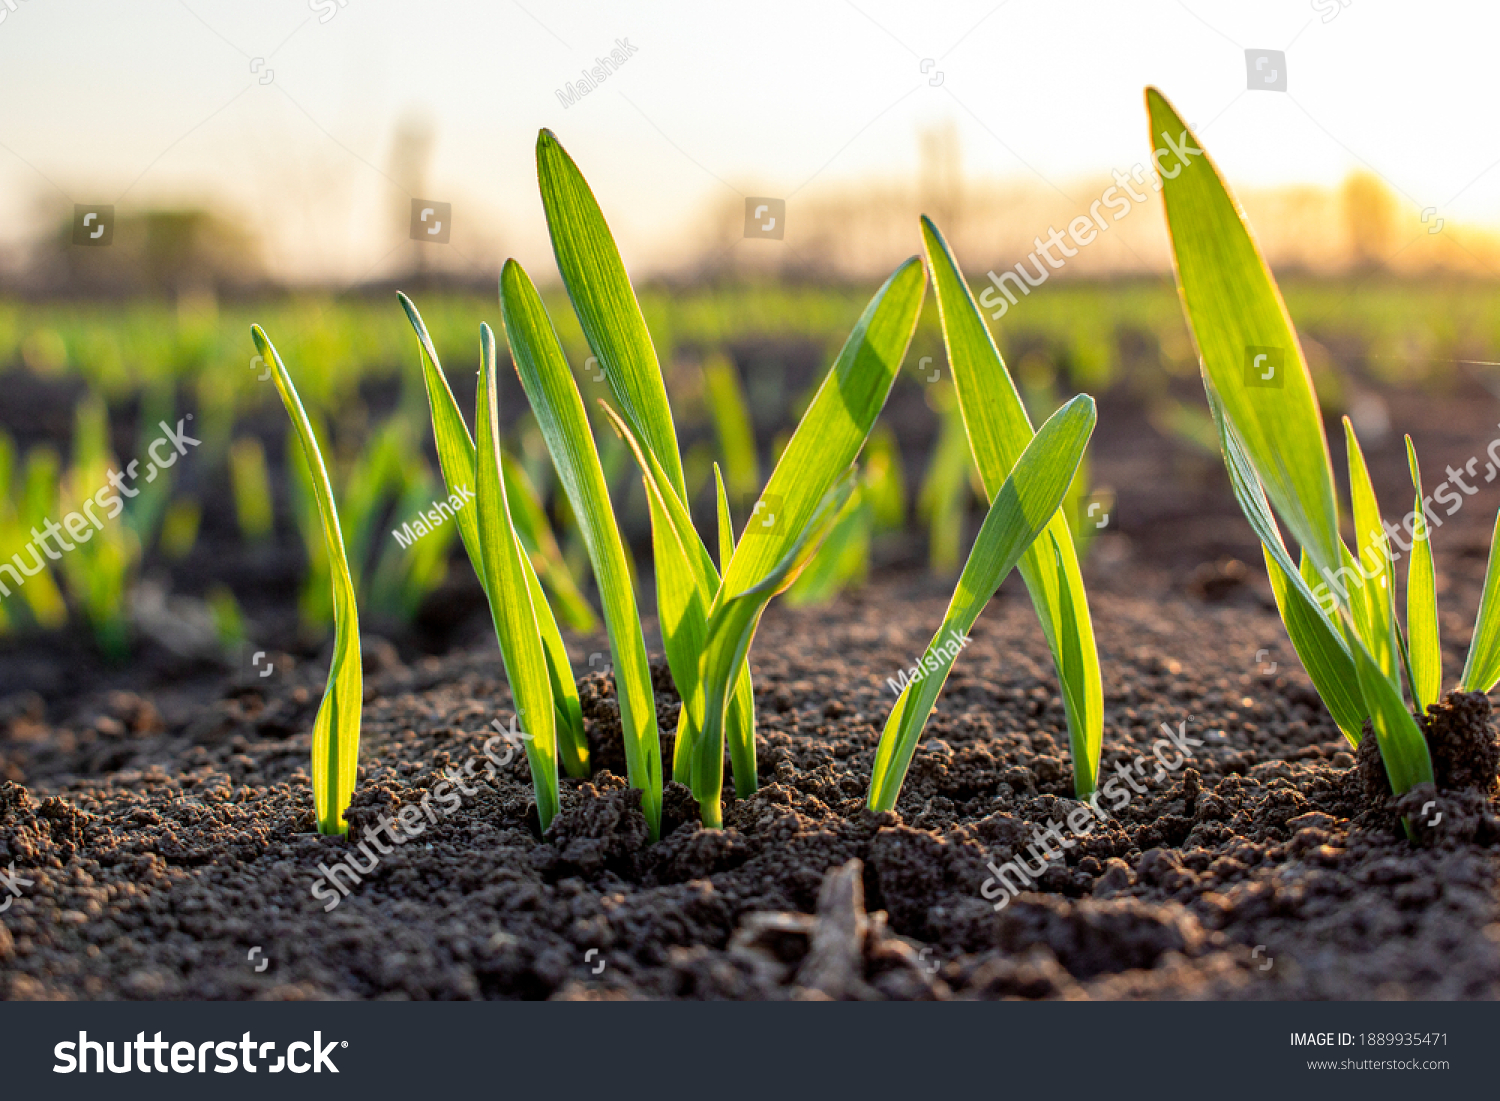 Sprouts of young barley or wheat that have just sprouted in the soil, dawn over a field with crops. #1889935471